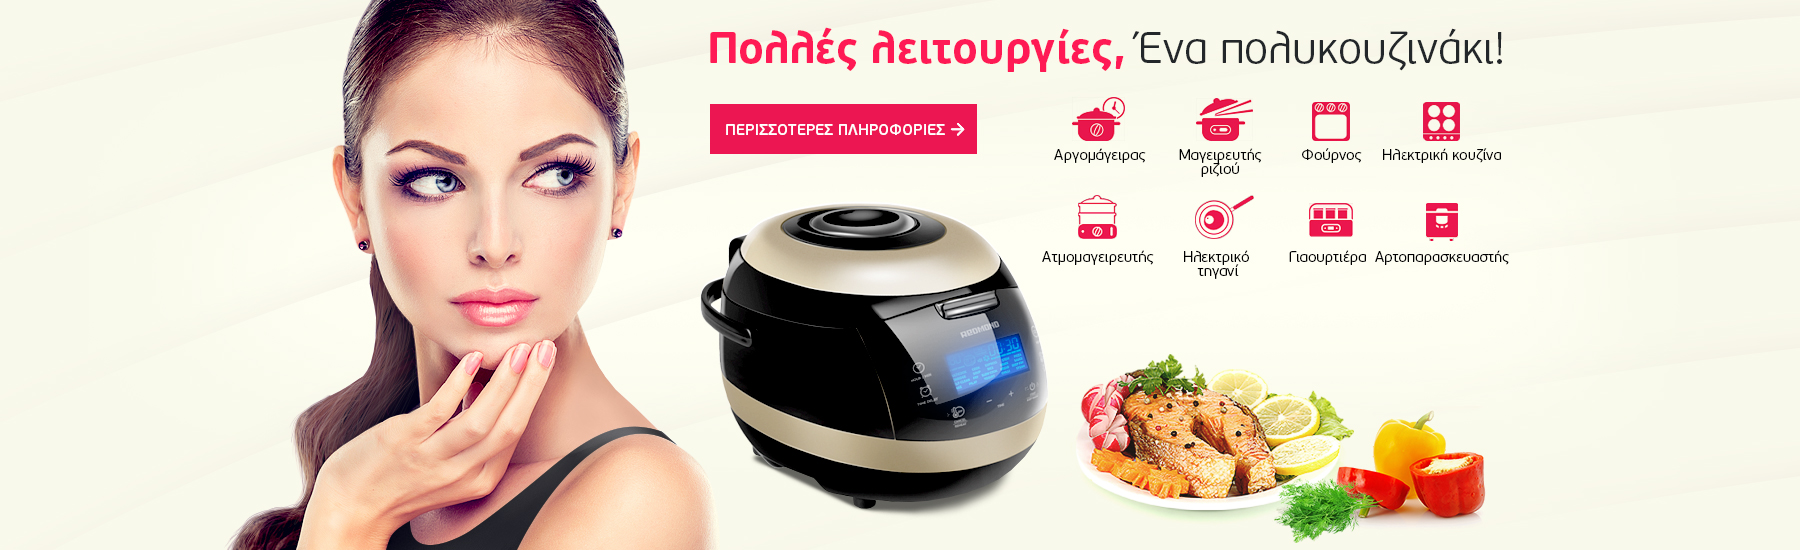 Many functions, one multicooker